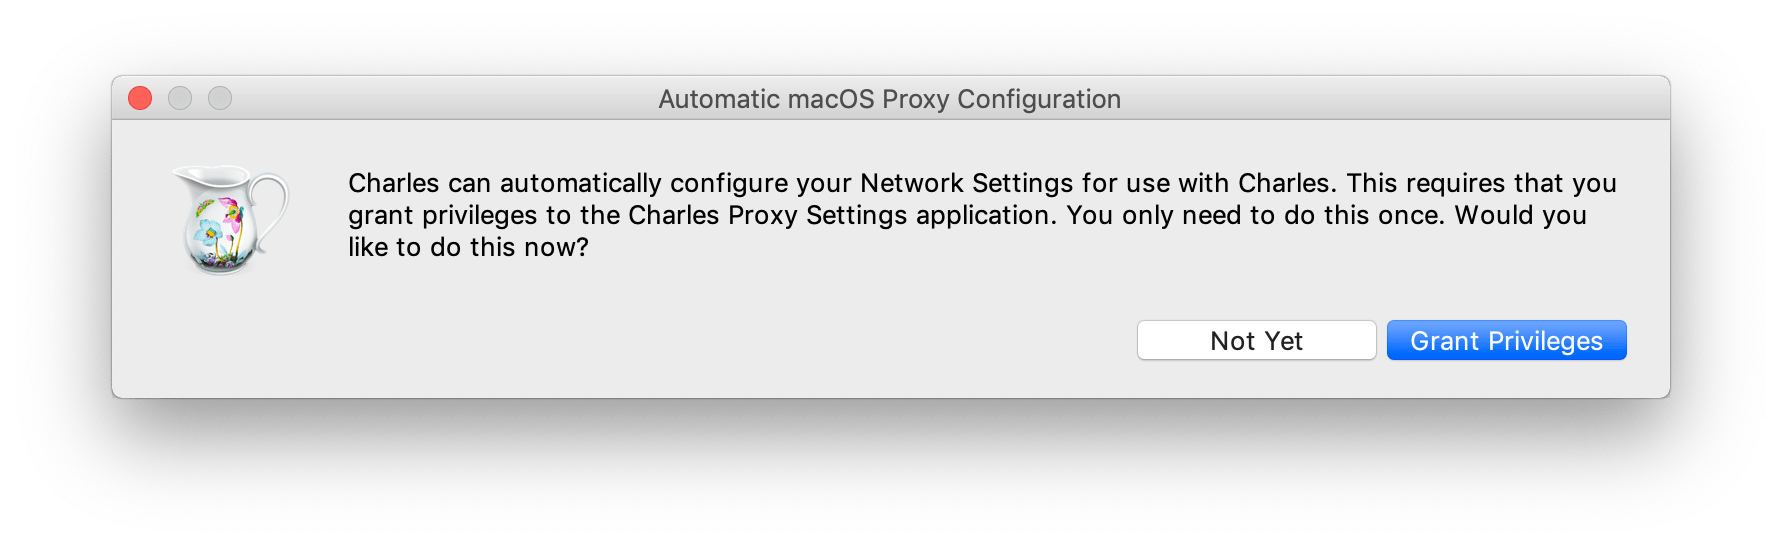 Grant Privileges to Automatic macOS Proxy Configuration dialog